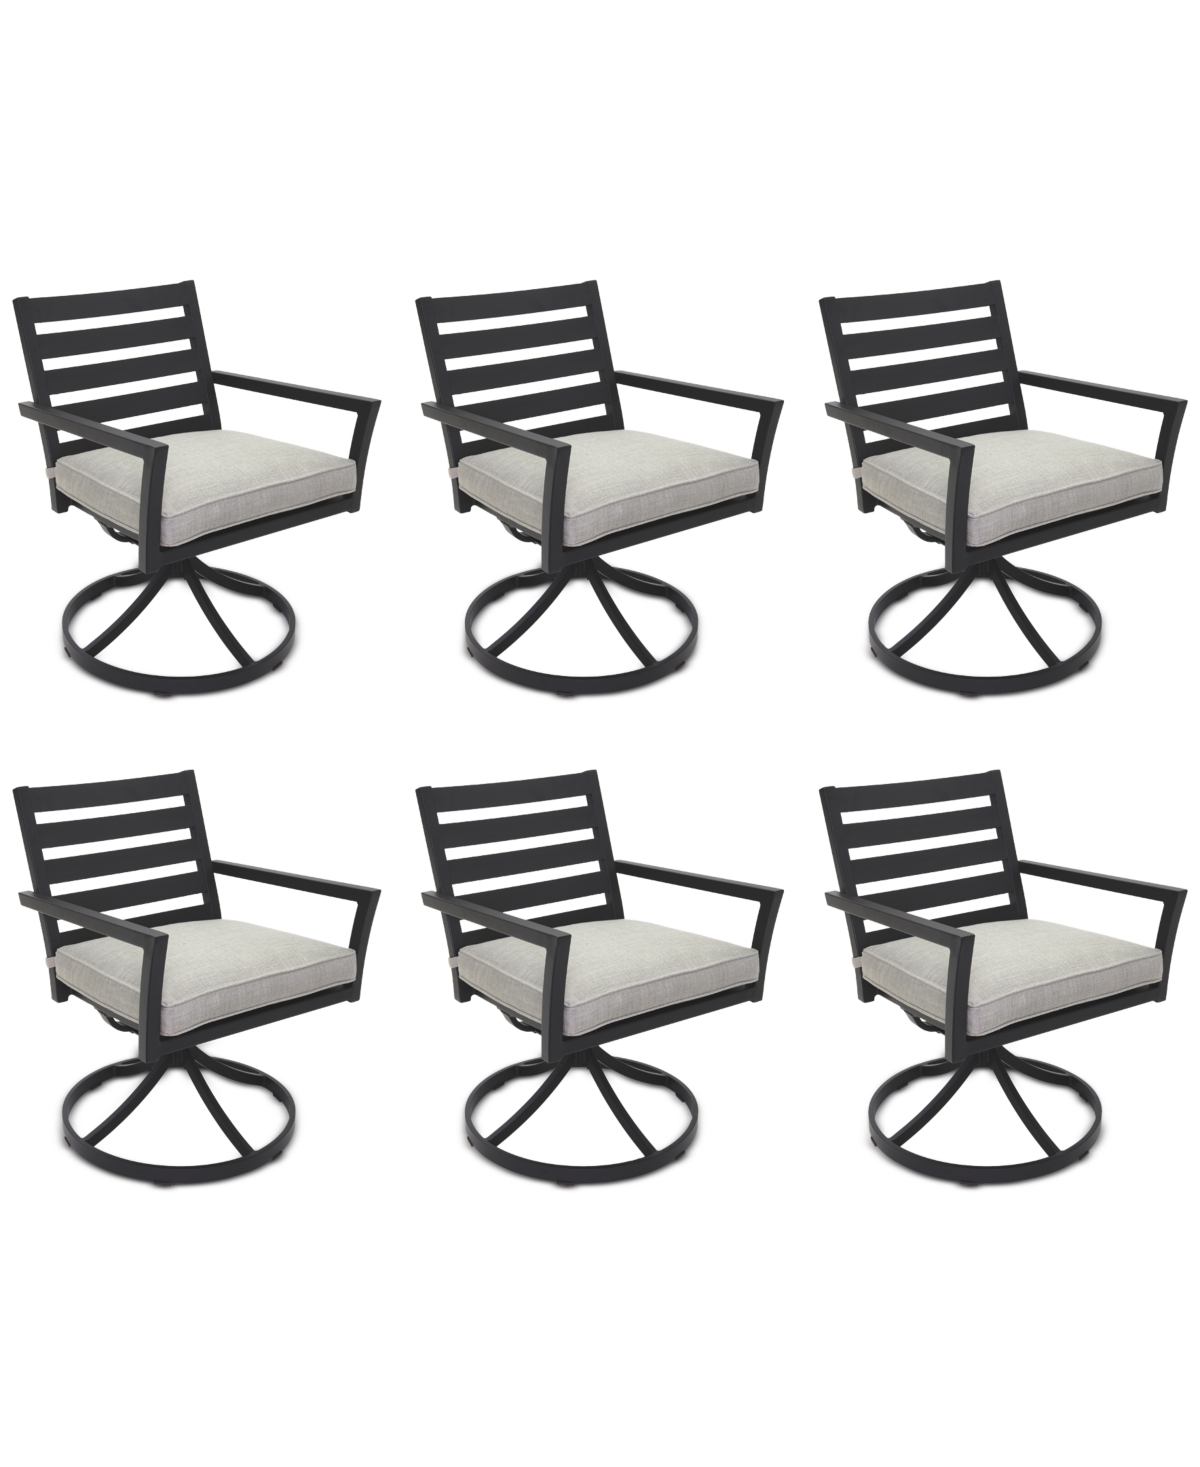 Agio Astaire Outdoor 6-pc Swivel Chair Bundle Set In Oyster Light Grey